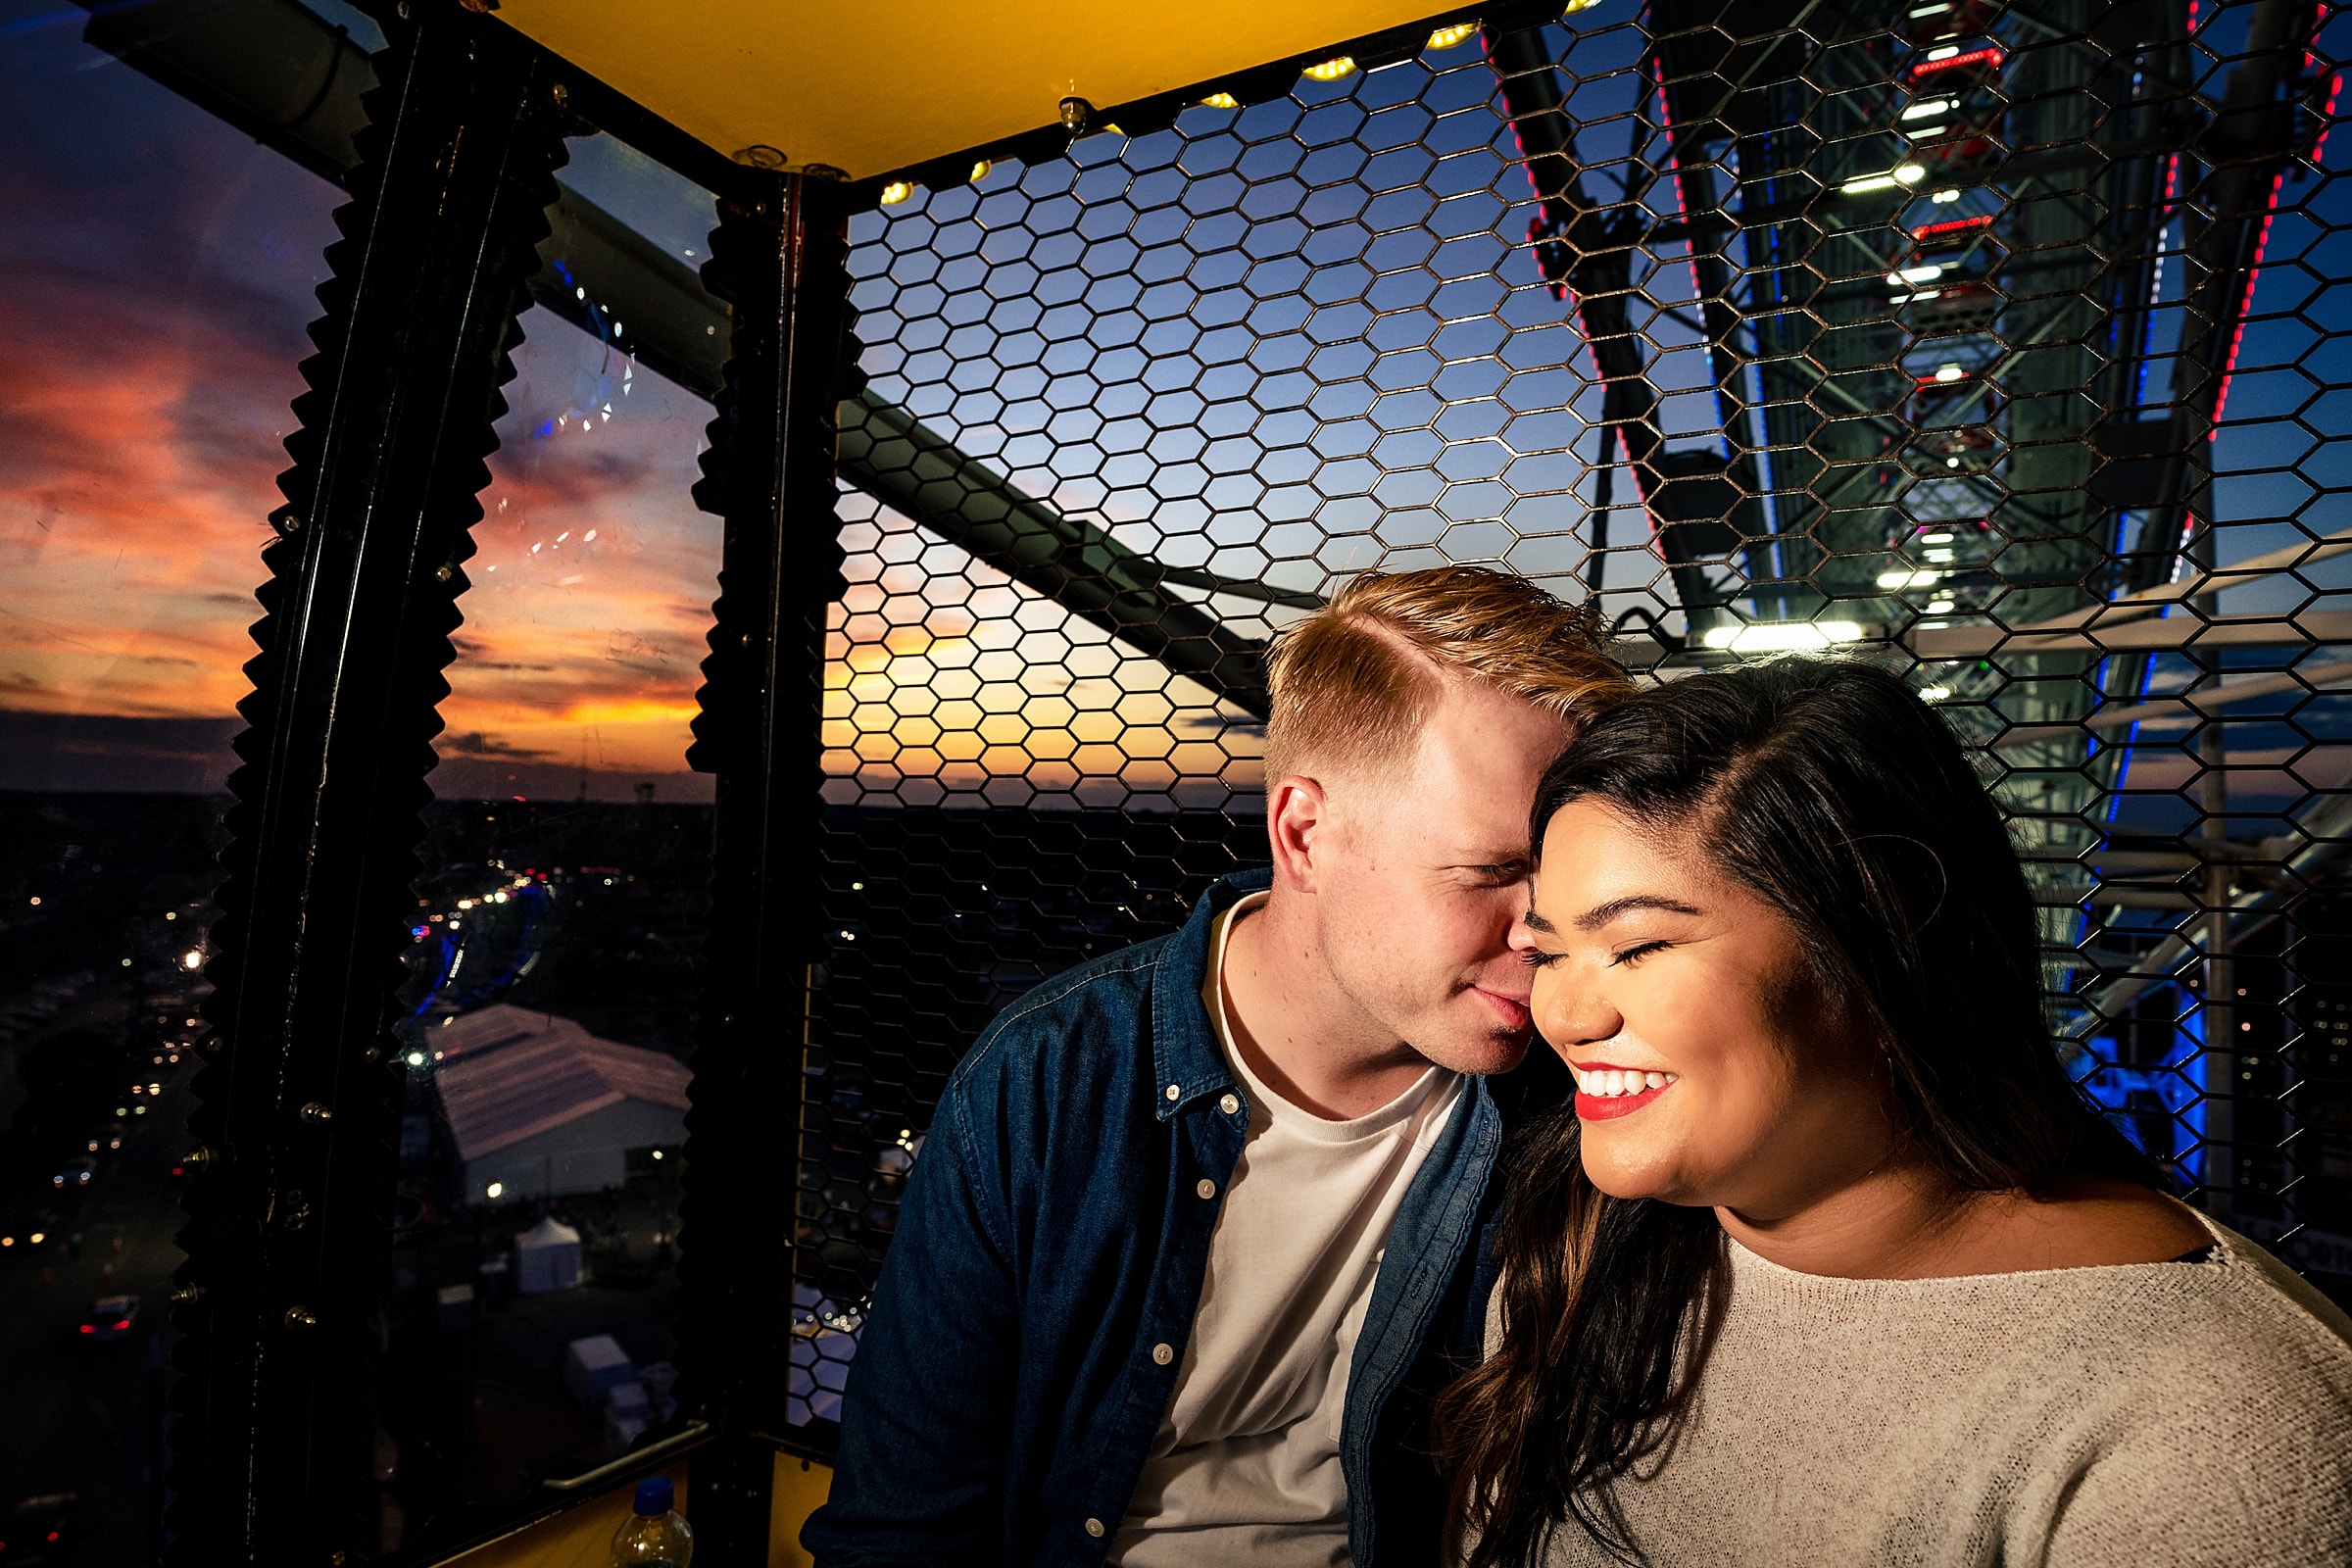 NC State Fair Engagement photos are some of the most fun - you can get on the ferris wheel